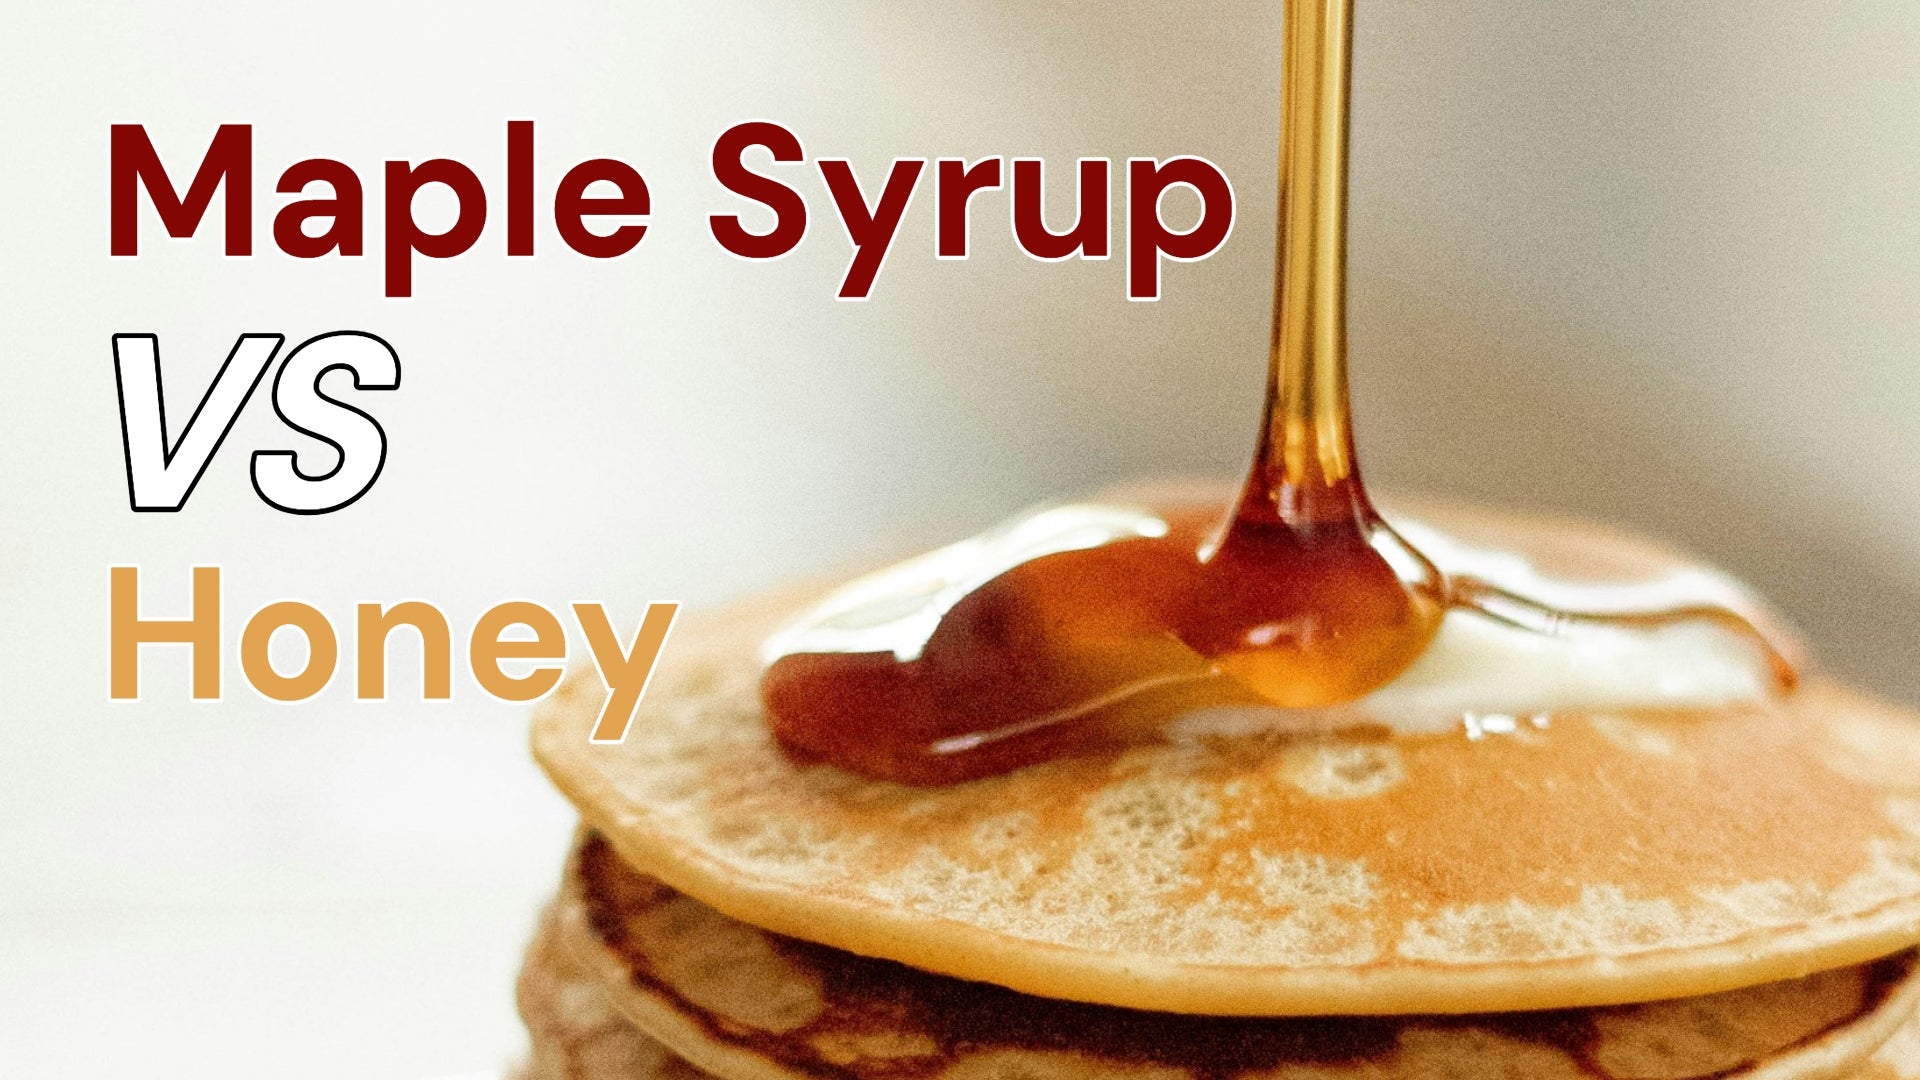 Which Is Healthier: Maple Syrup vs Honey?